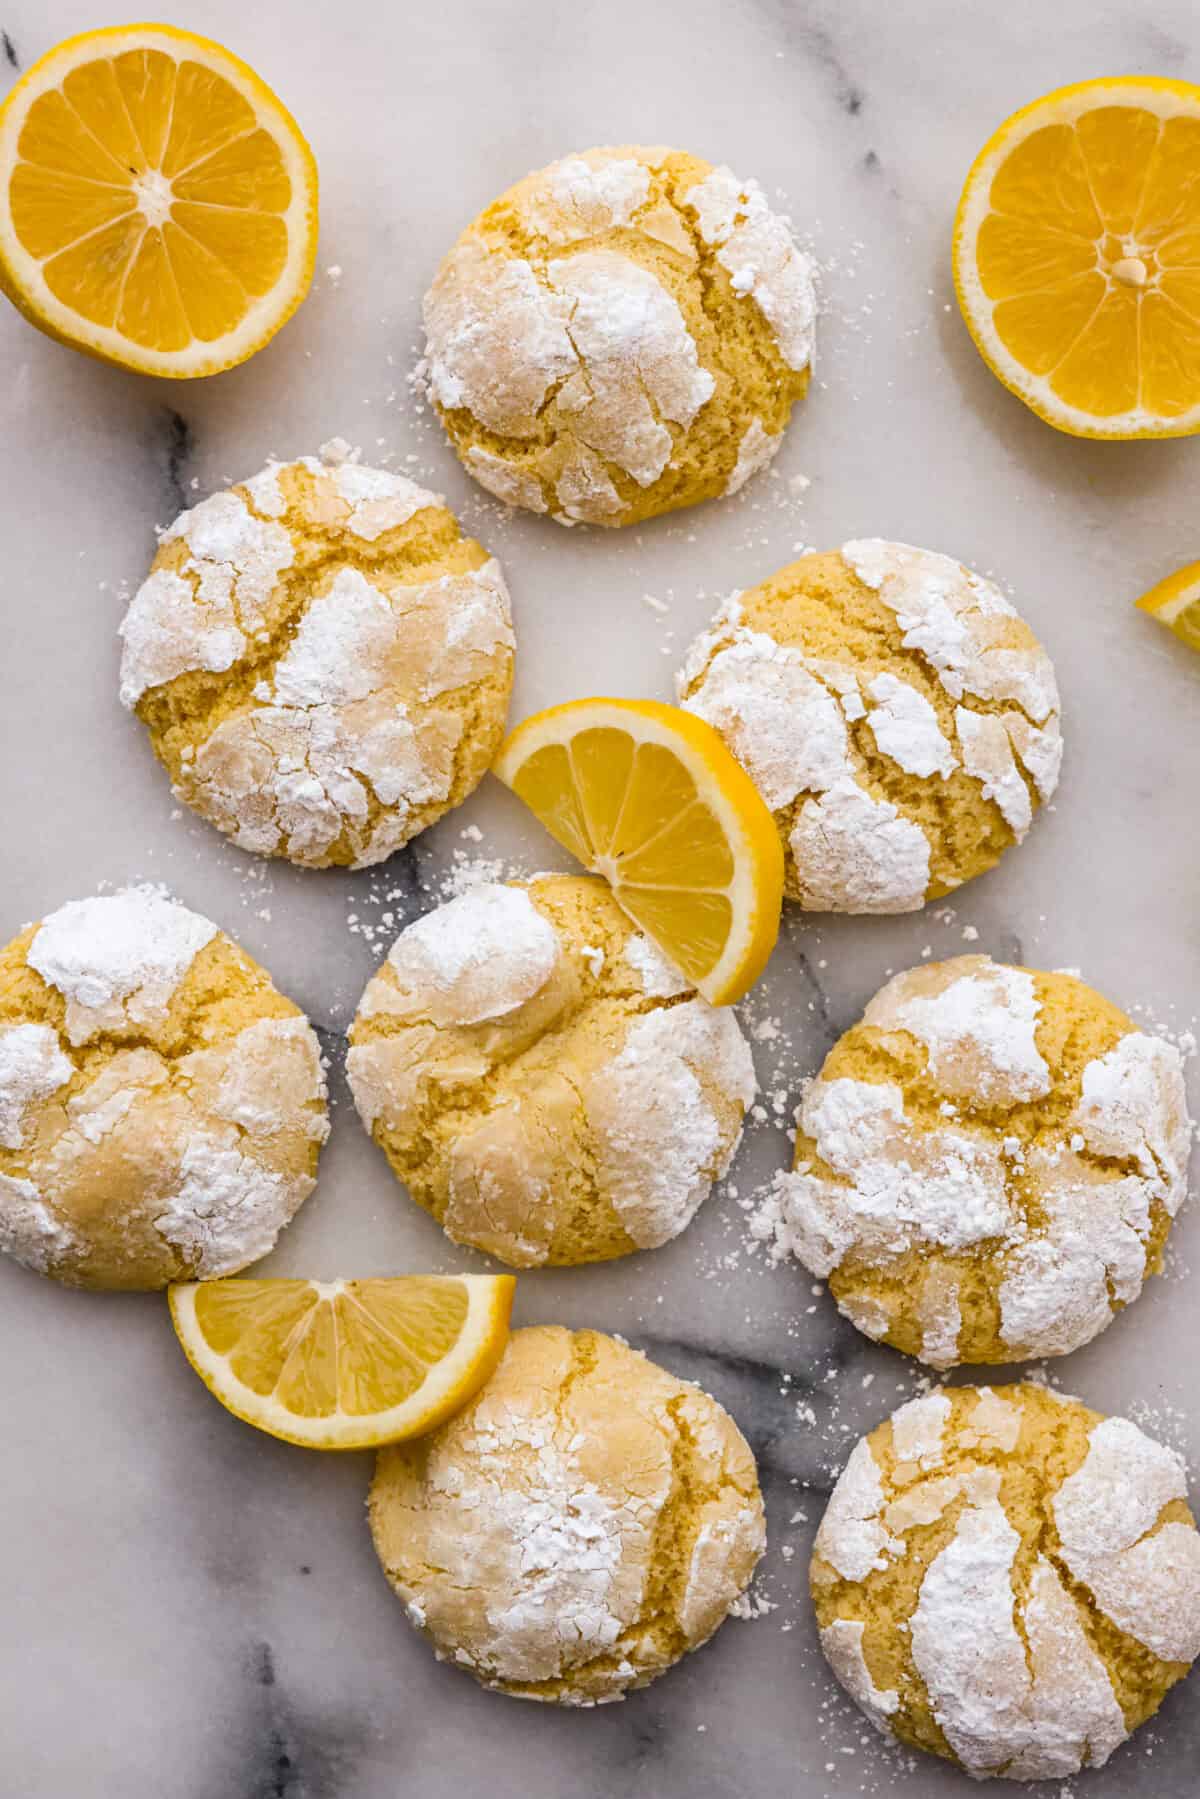 Top-down view of the lemon crinkle cookies, garnished with lemon slices